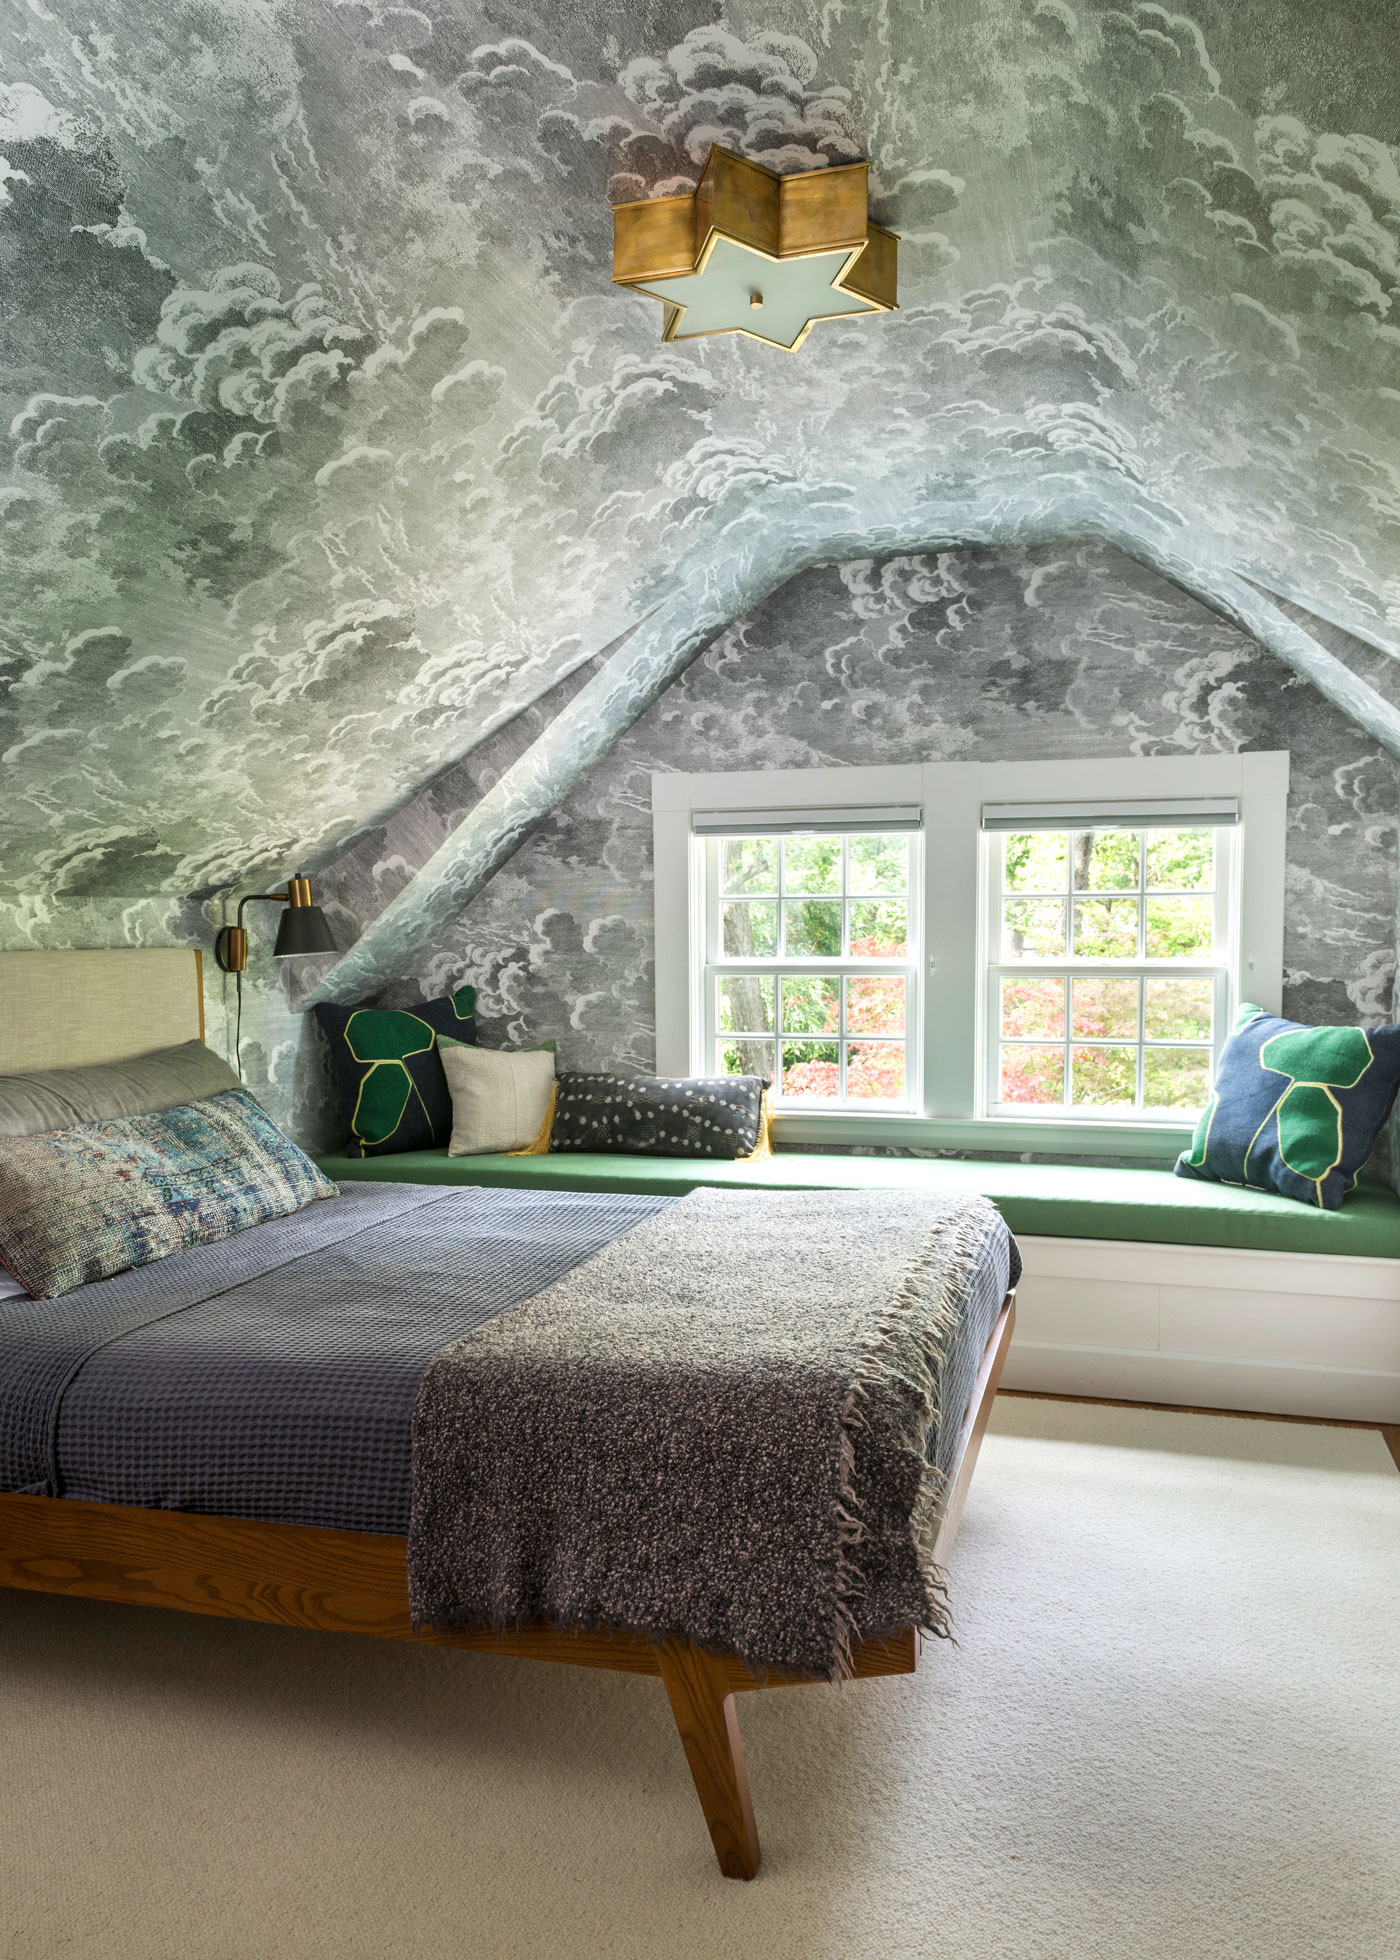 Bedroom with ceiling wallpaper based on a Moroccan tile roof